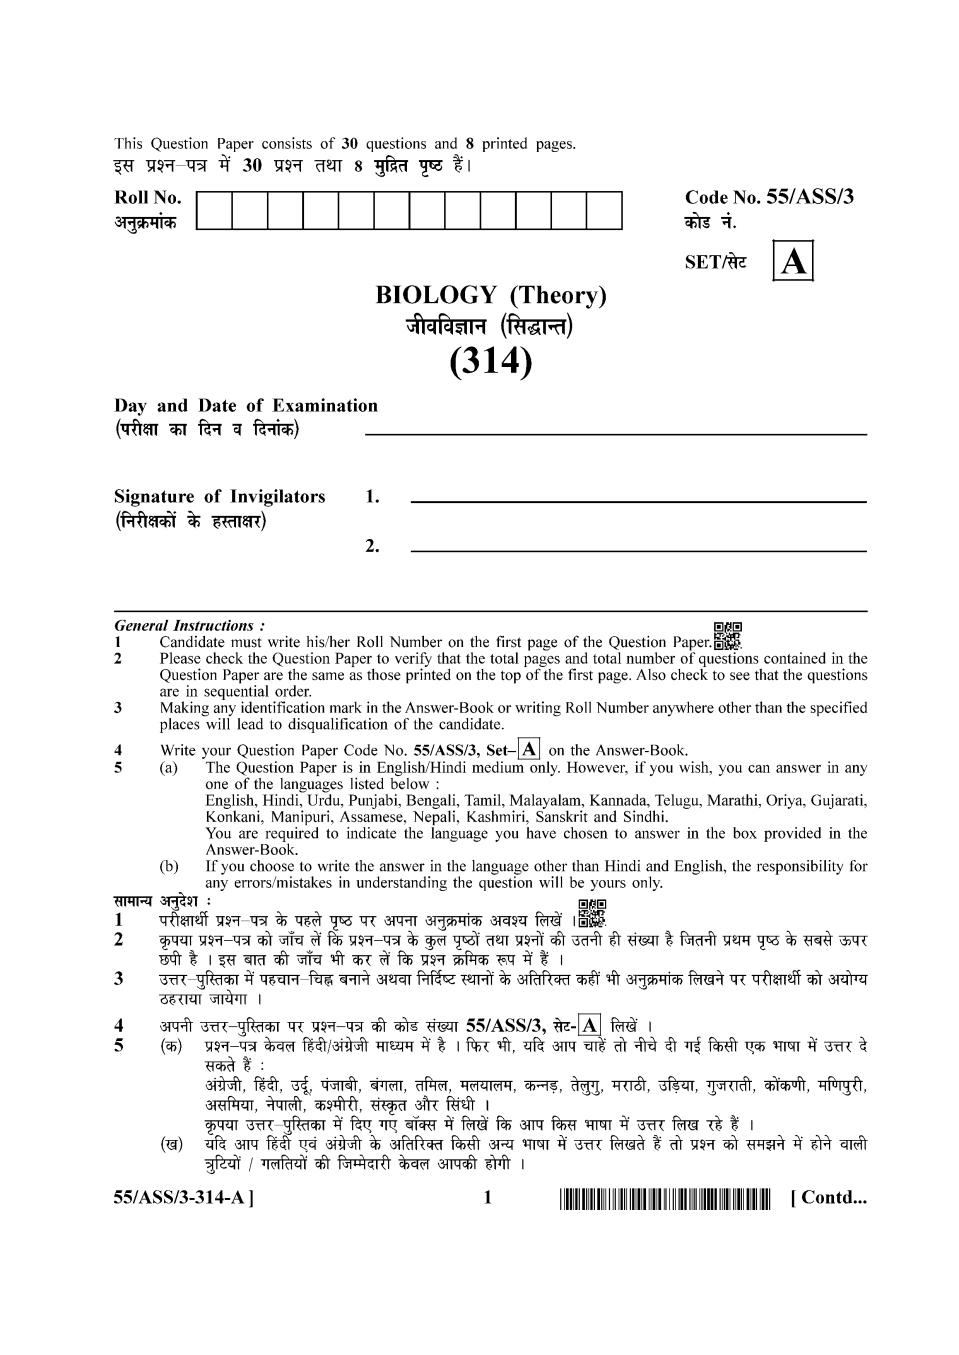 NIOS Class 12 Question Paper Oct 2017 - Biology - Page 1